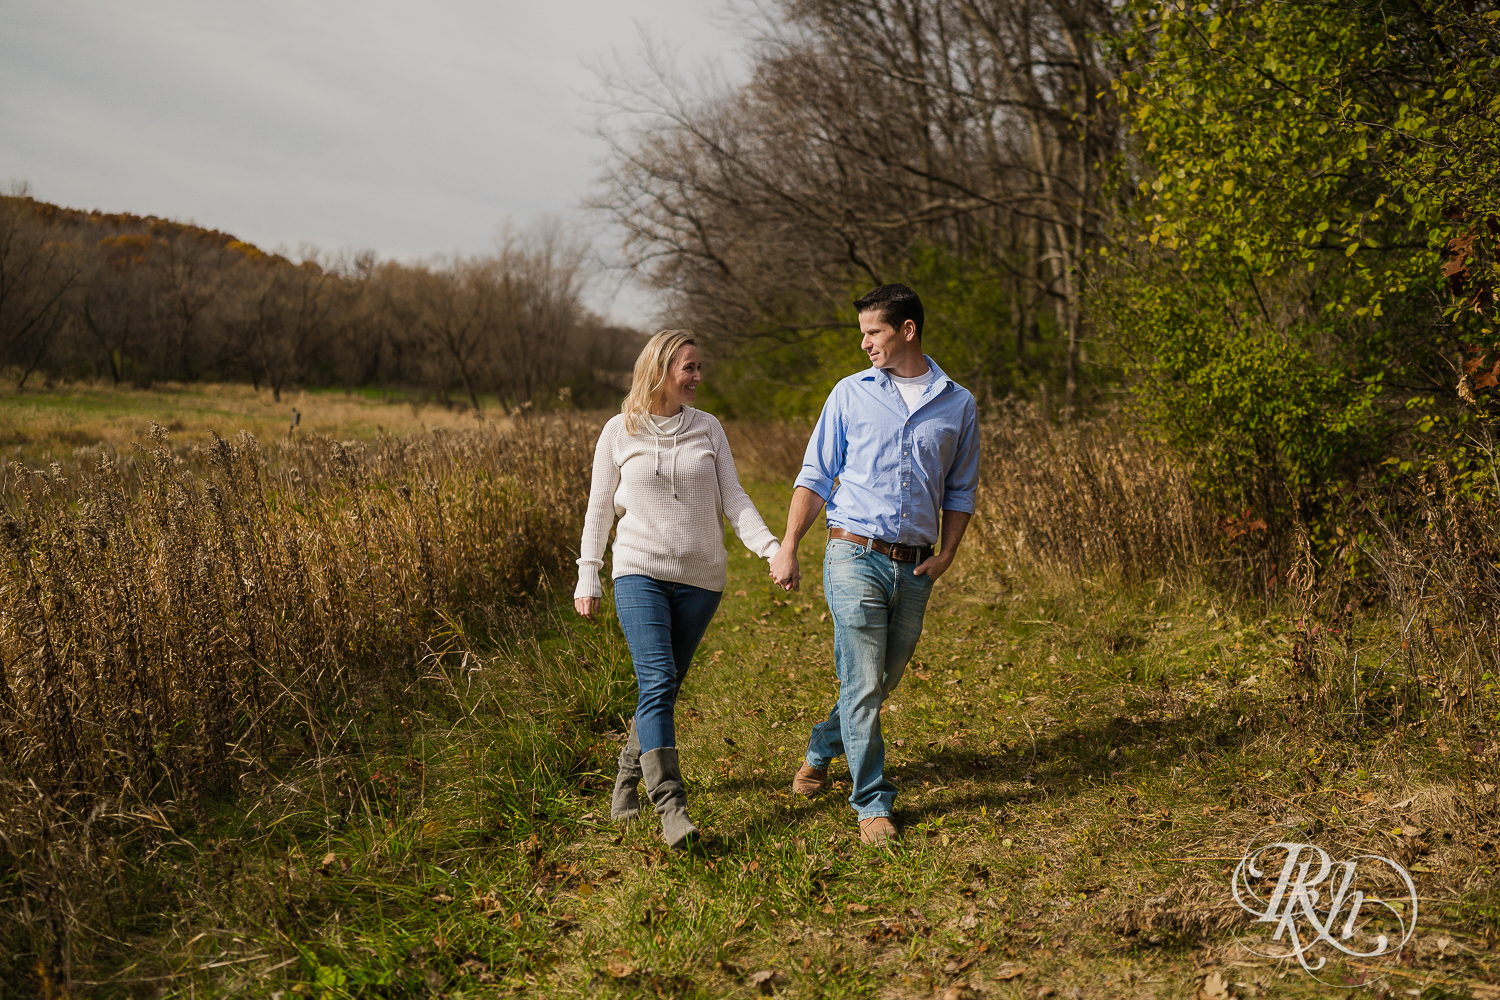 Man walking with blonde woman in grass during fall engagement photography session in Chaska, Minnesota.